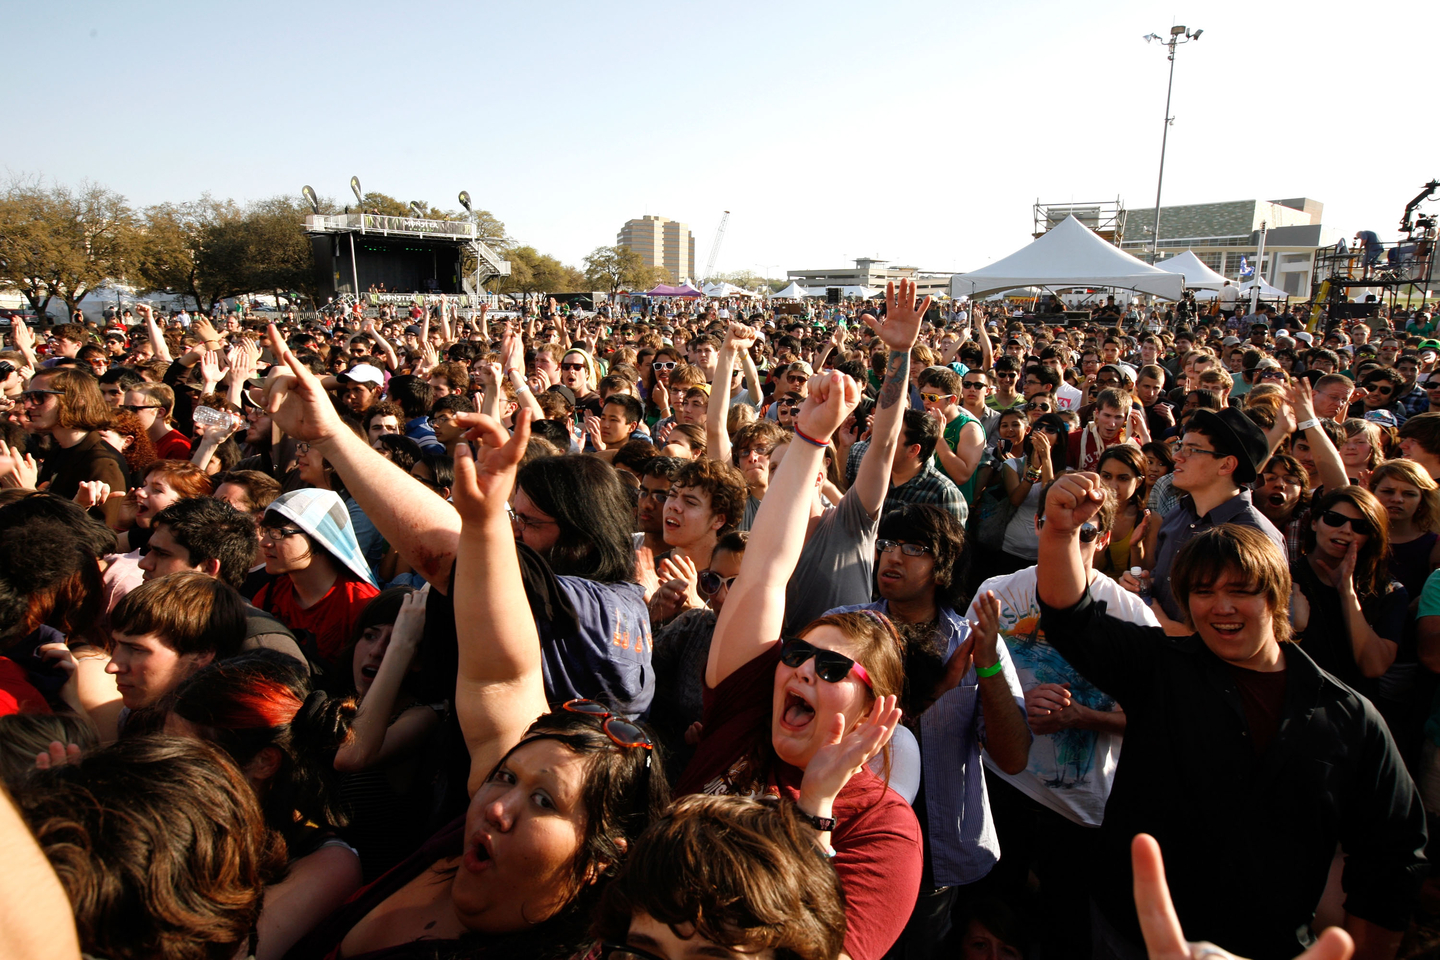 Outdoor Stage, 2011. Photo by Scott Melcer/Getty Images for SXSW